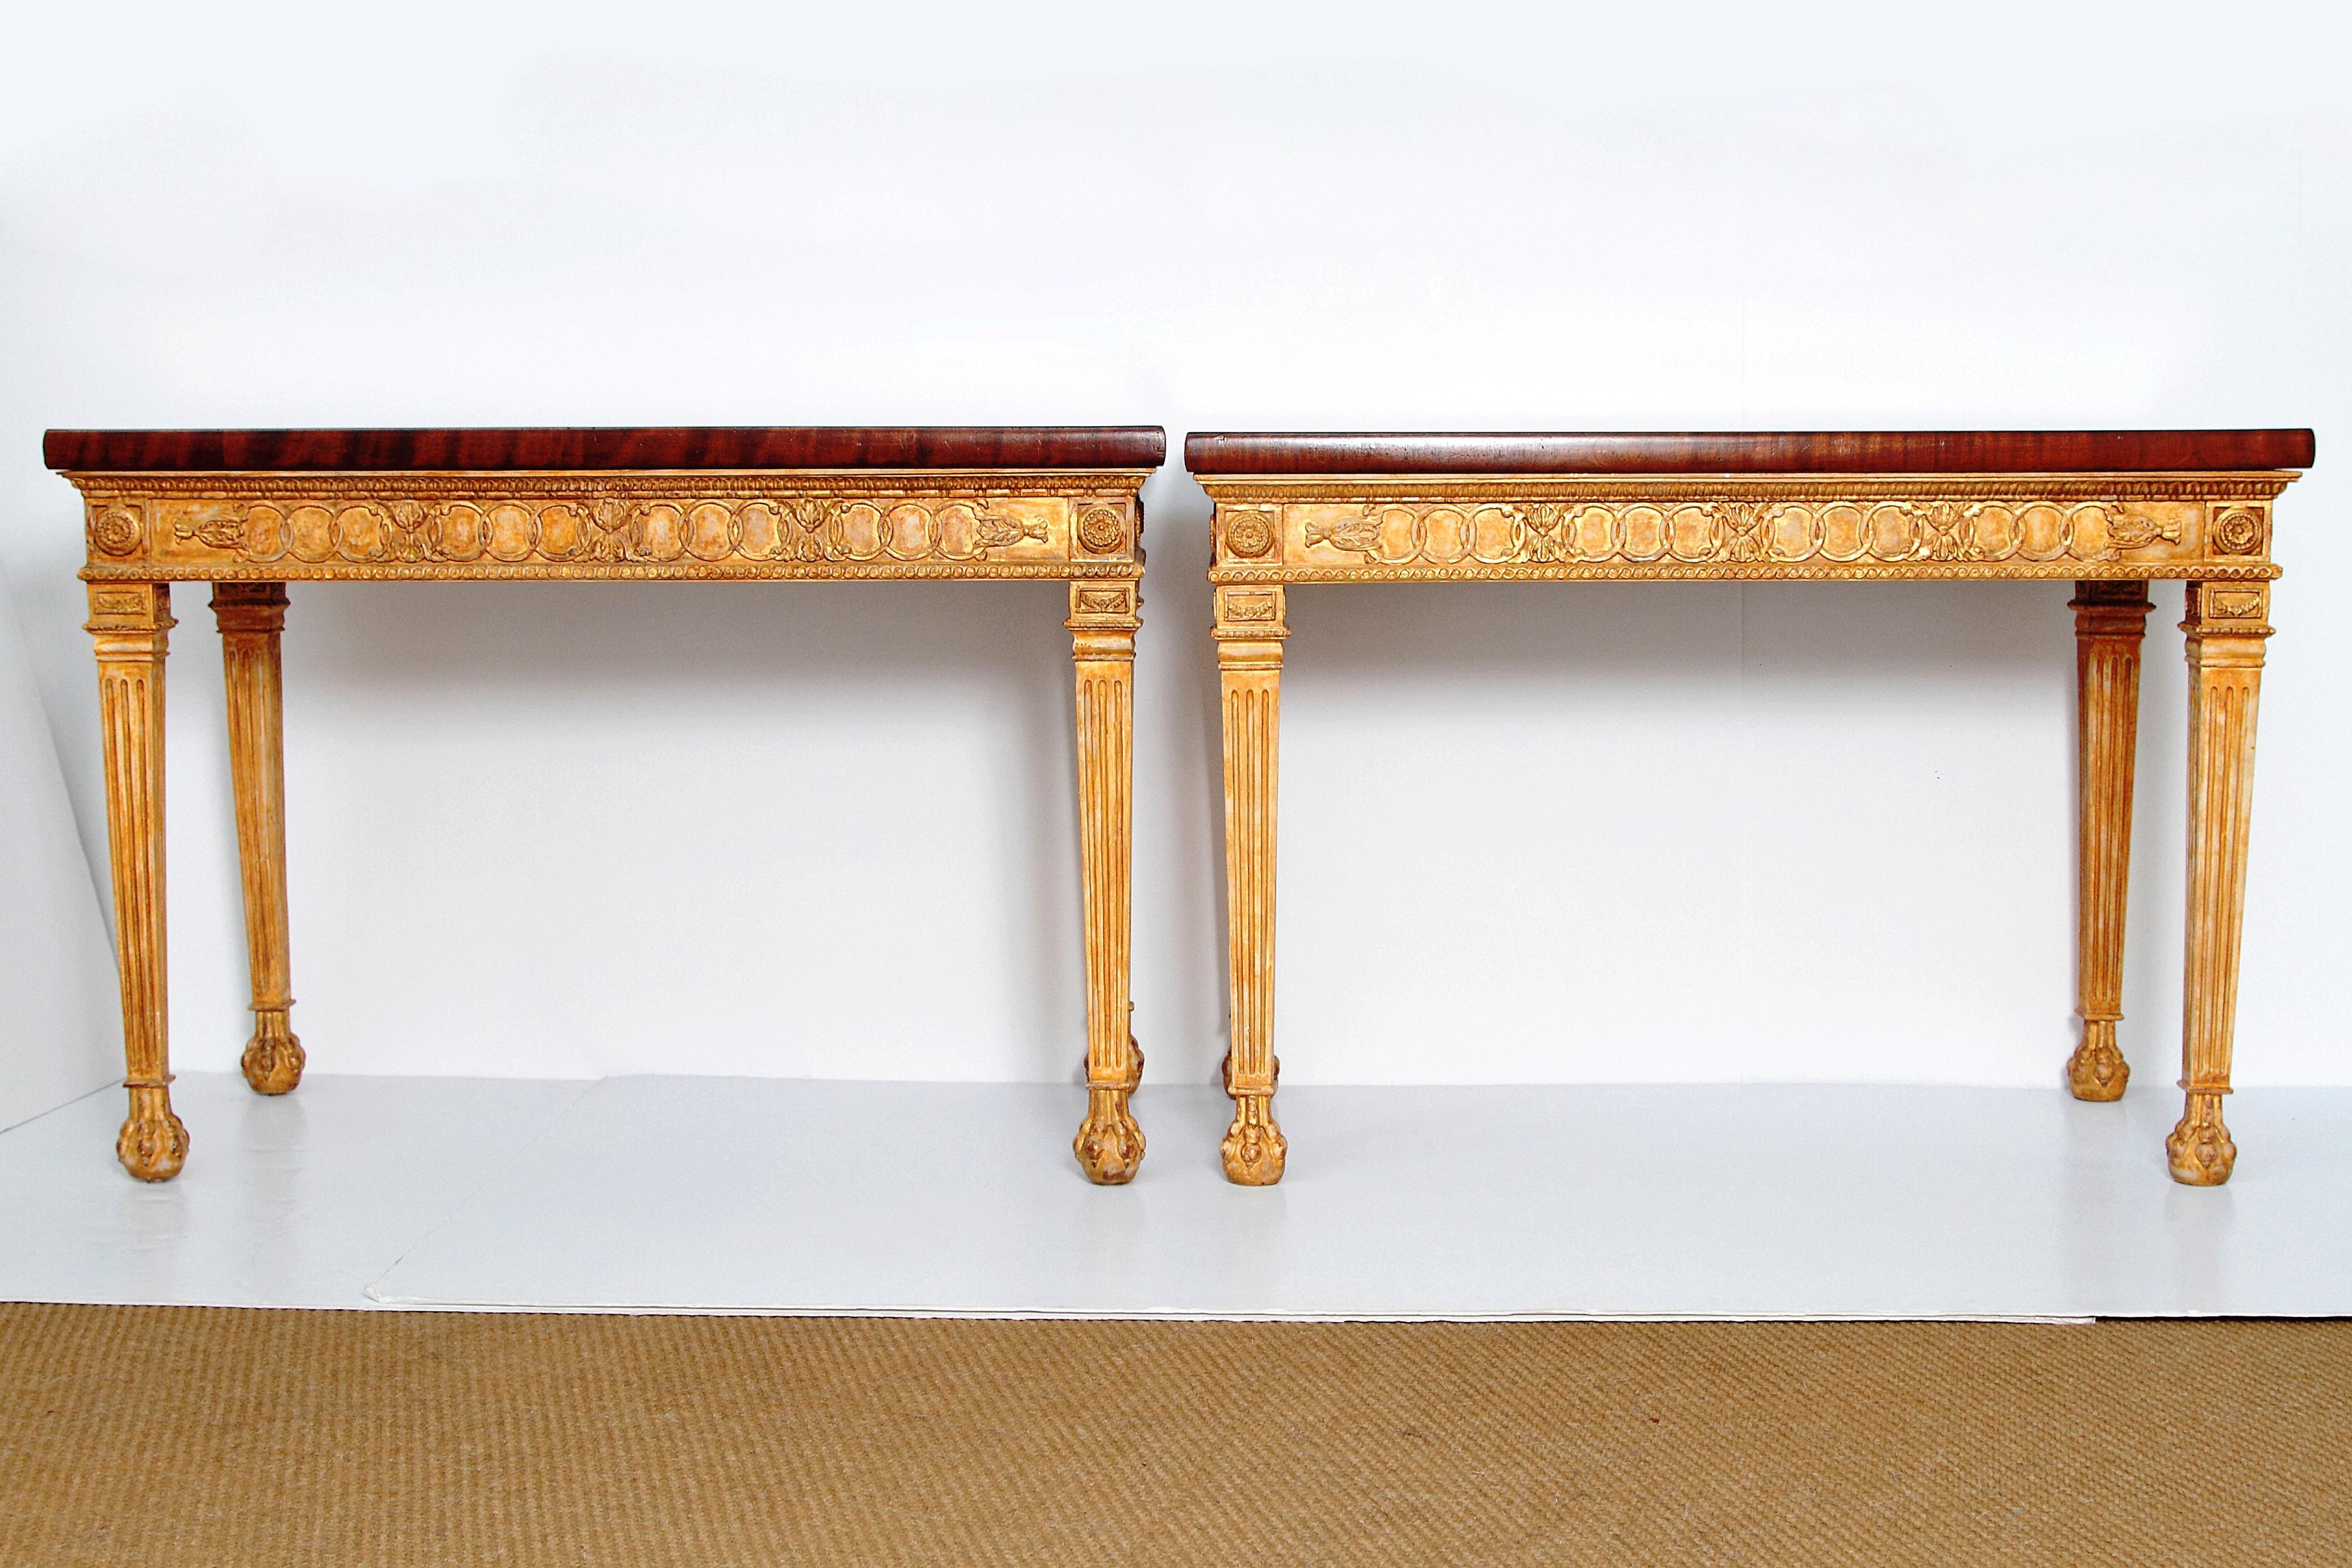 Pair of very handsome George III-style giltwood and mahogany console tables, carved and gilded base with tapered, fluted legs and ball and claw feet with beautiful mahogany table tops.